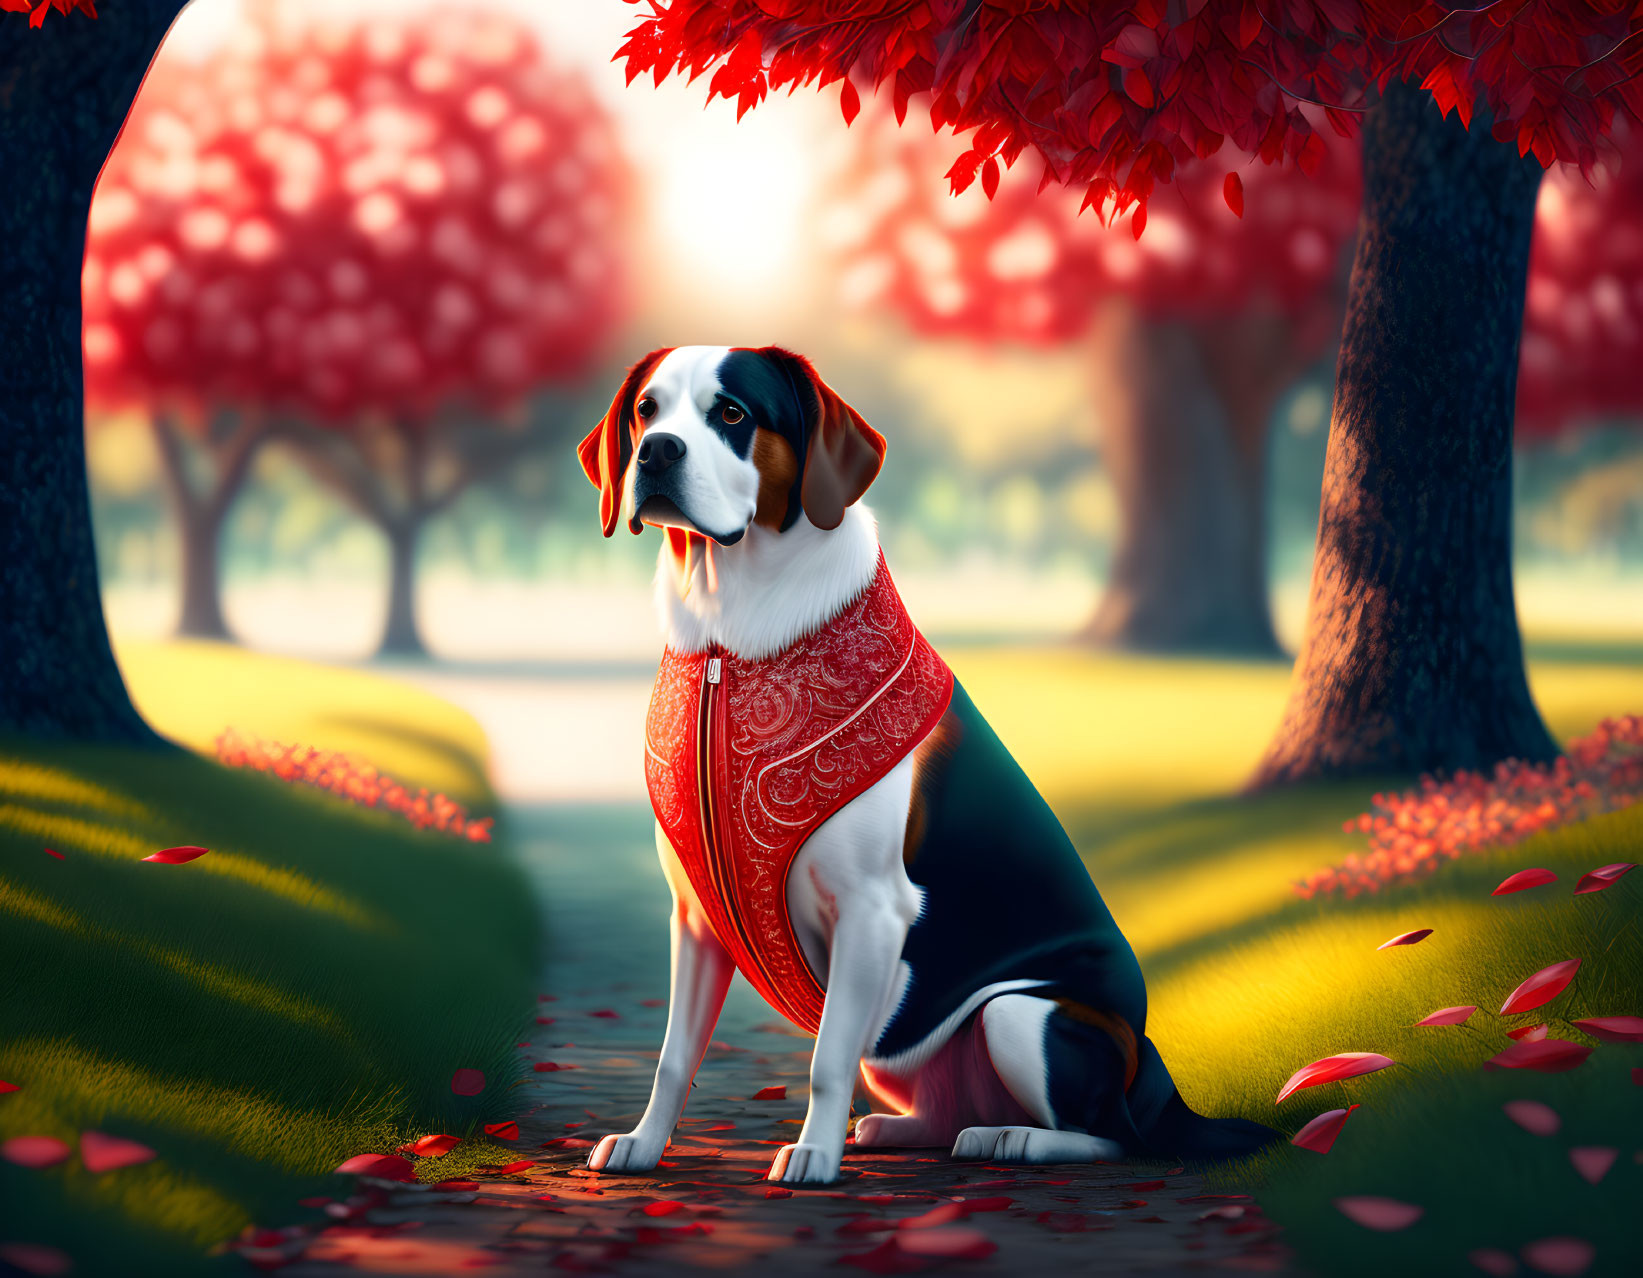 Red bandana dog sitting in scenic park with red-leafed trees